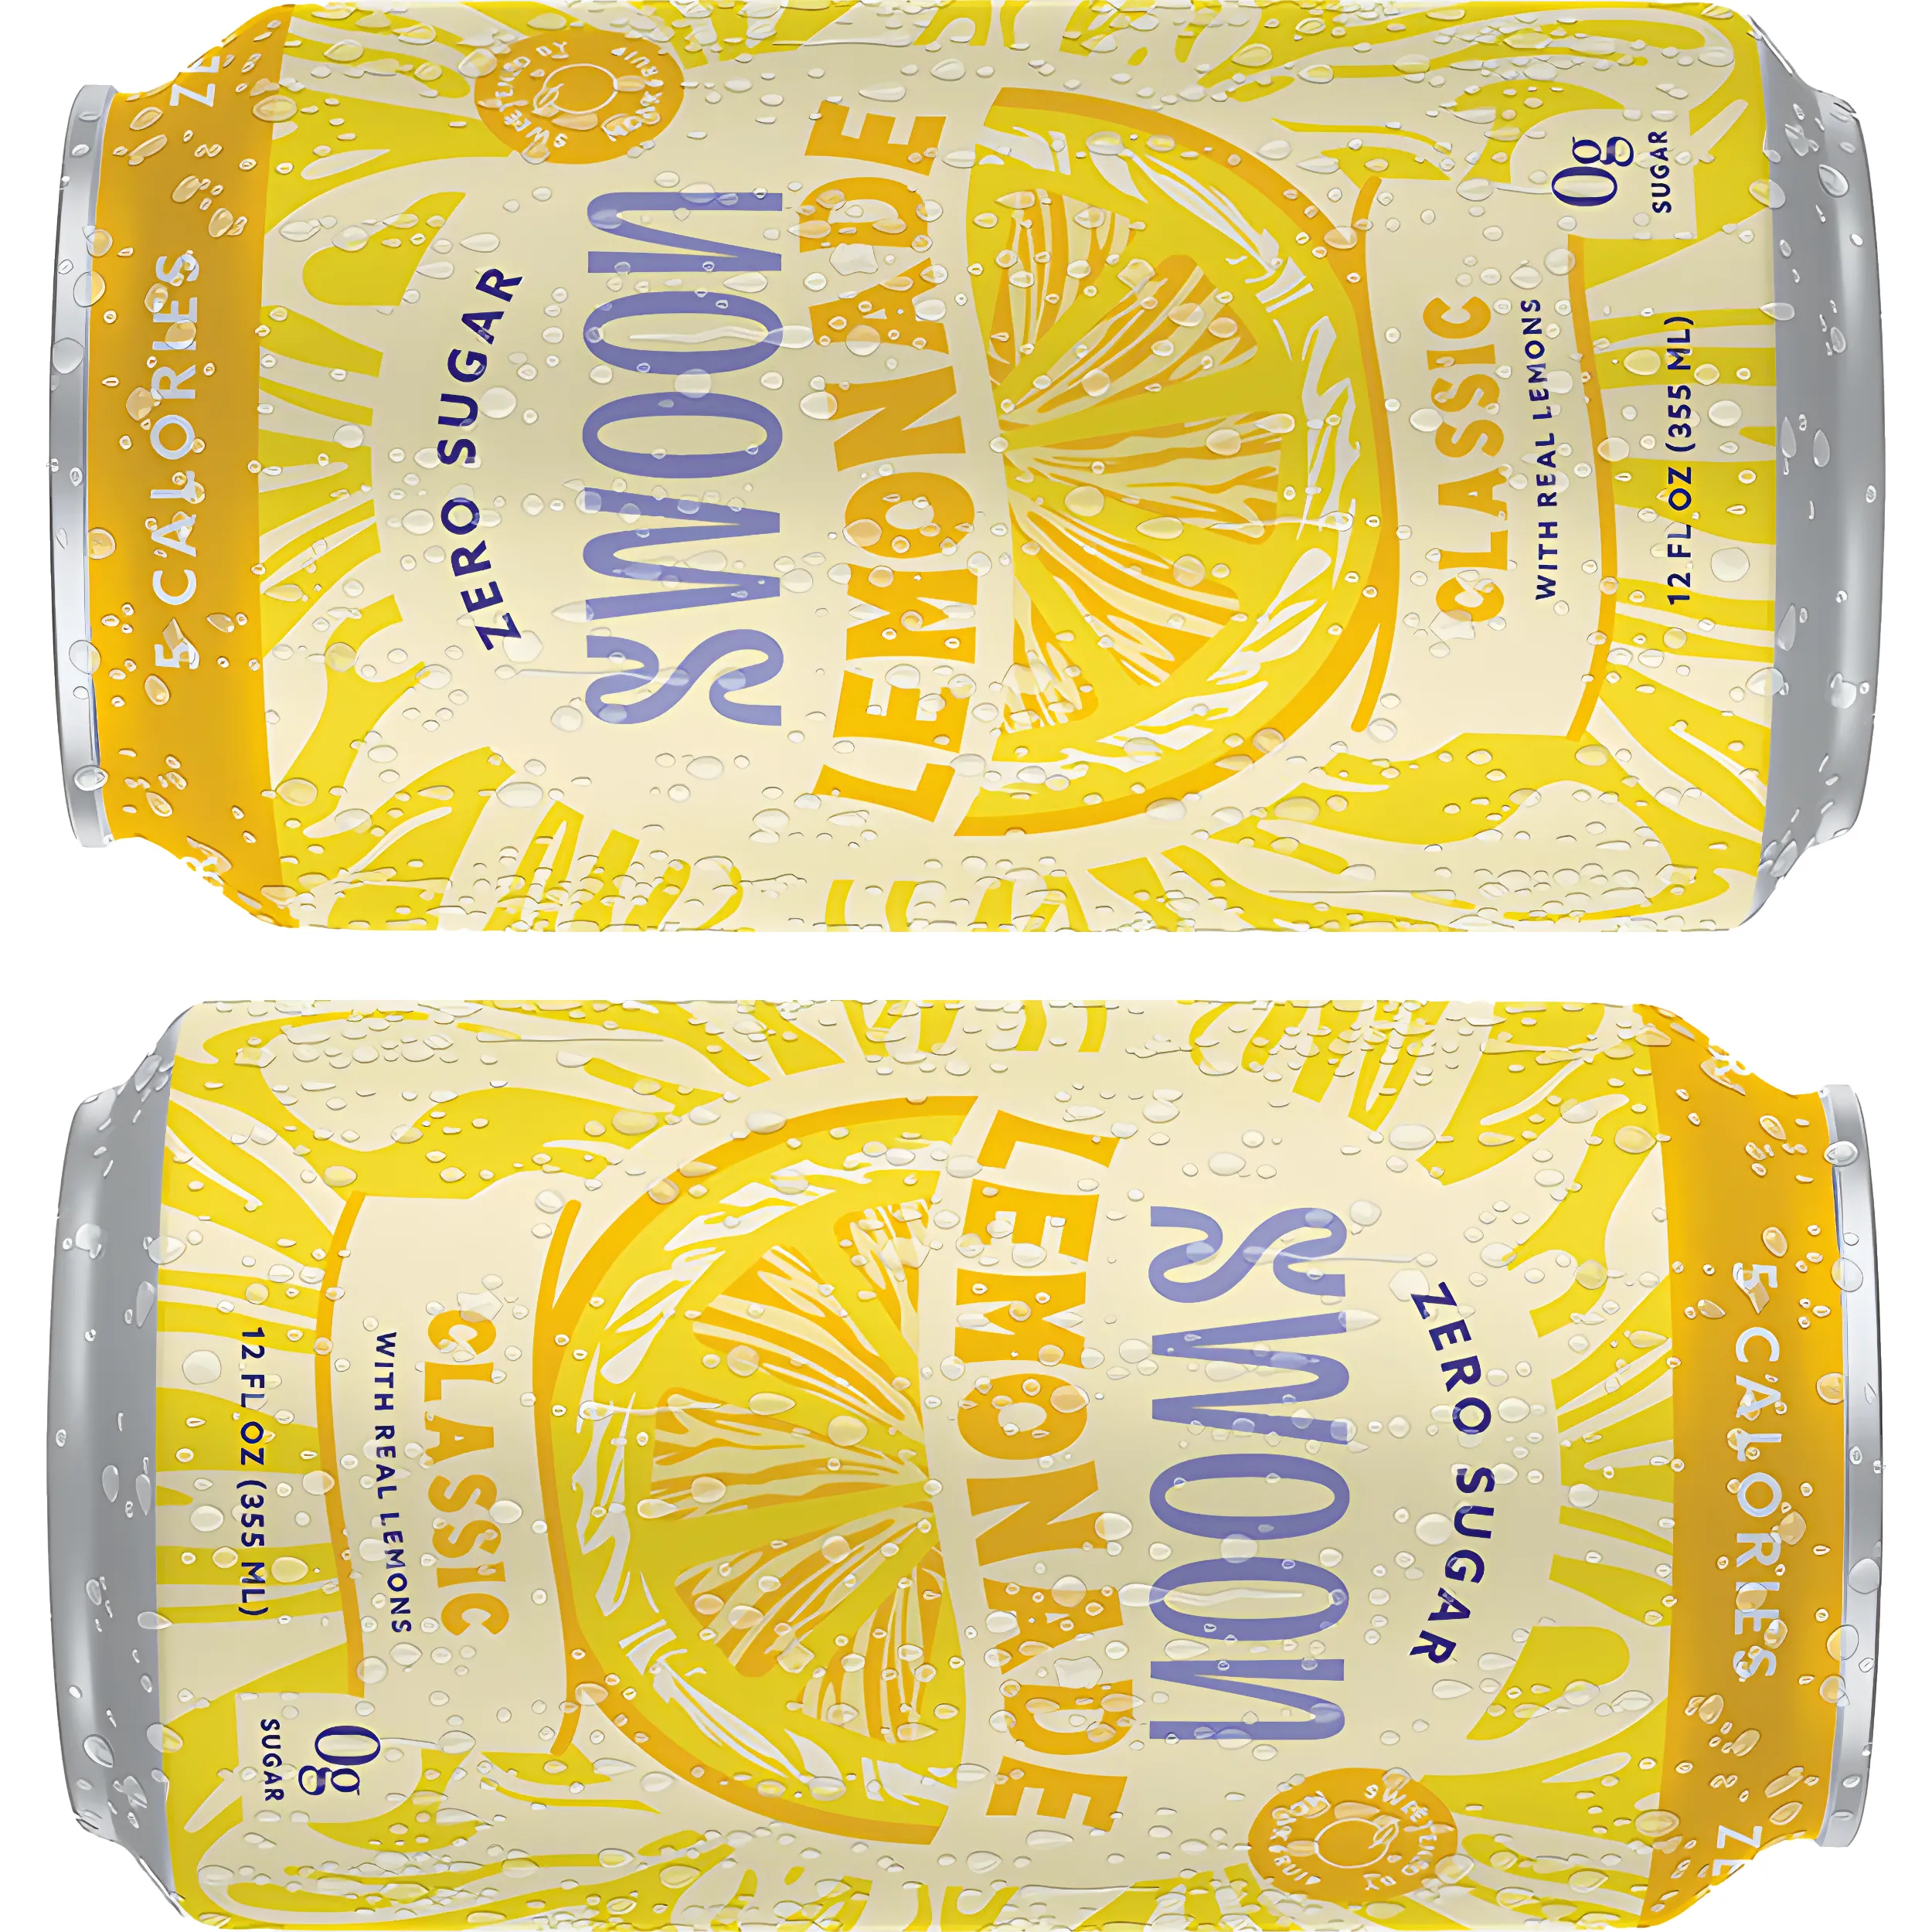 Free Swoon 4-Pk Up To $6.99 Value After Rebate